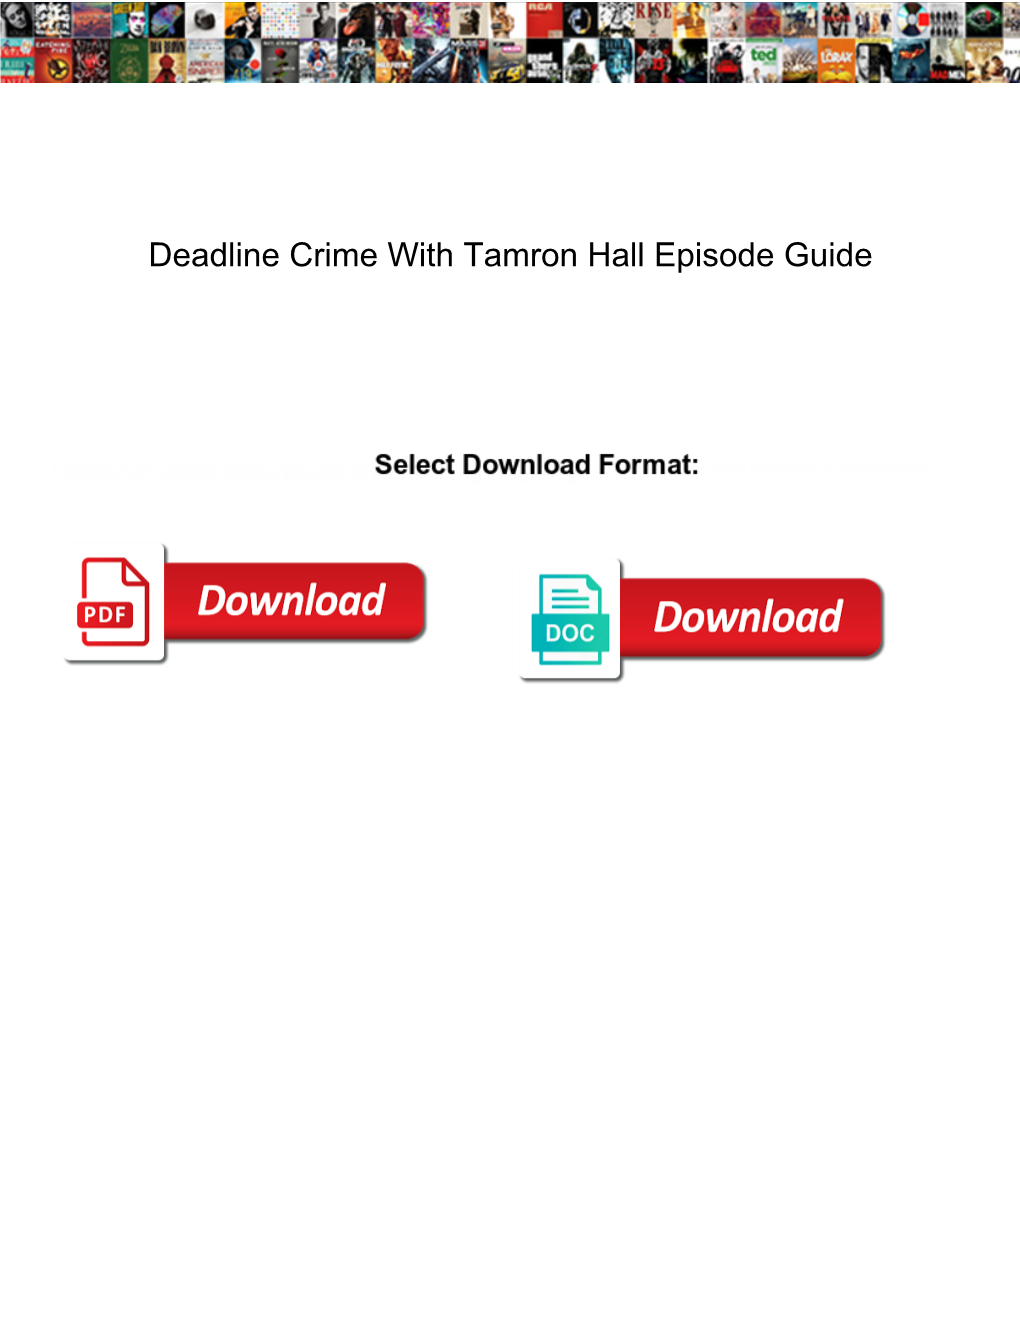 Deadline Crime with Tamron Hall Episode Guide